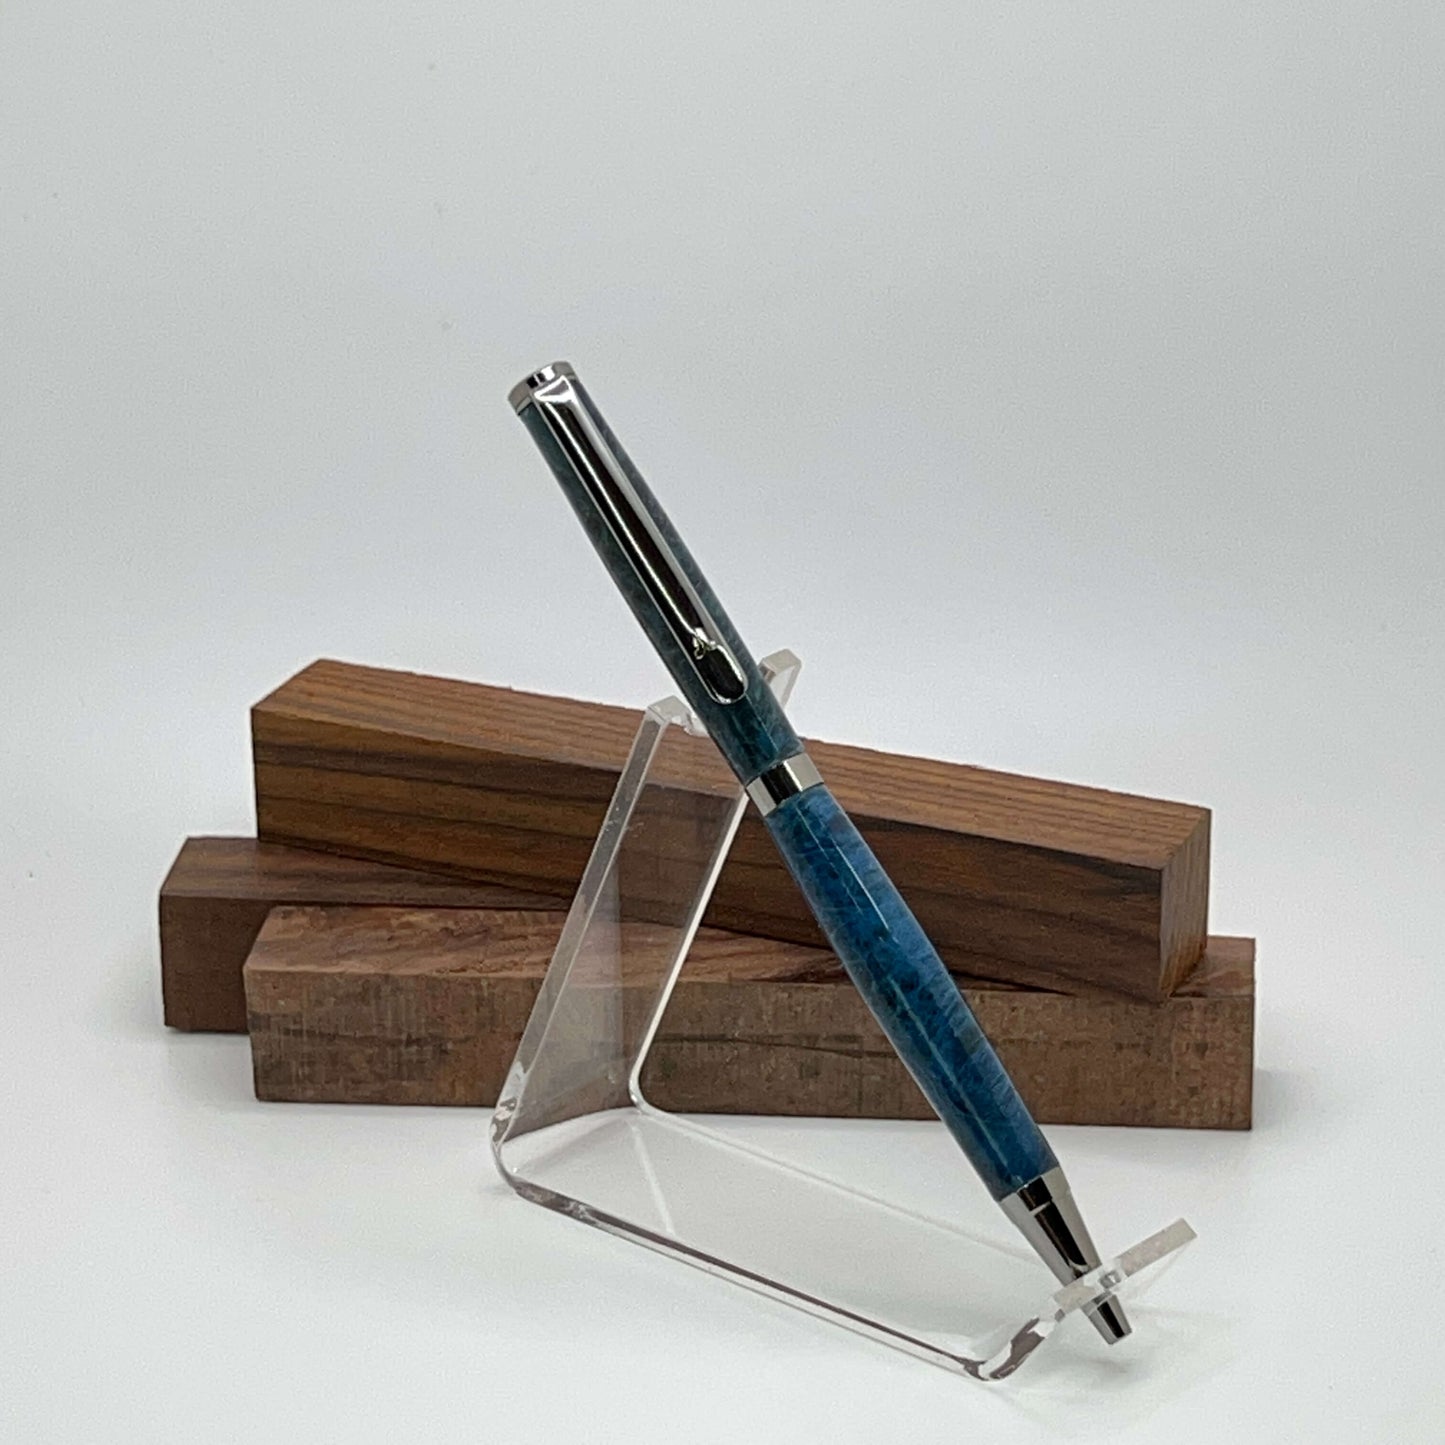 Handcrafted pen with Box Elder Burl wood dyed blue and black titanium hardware